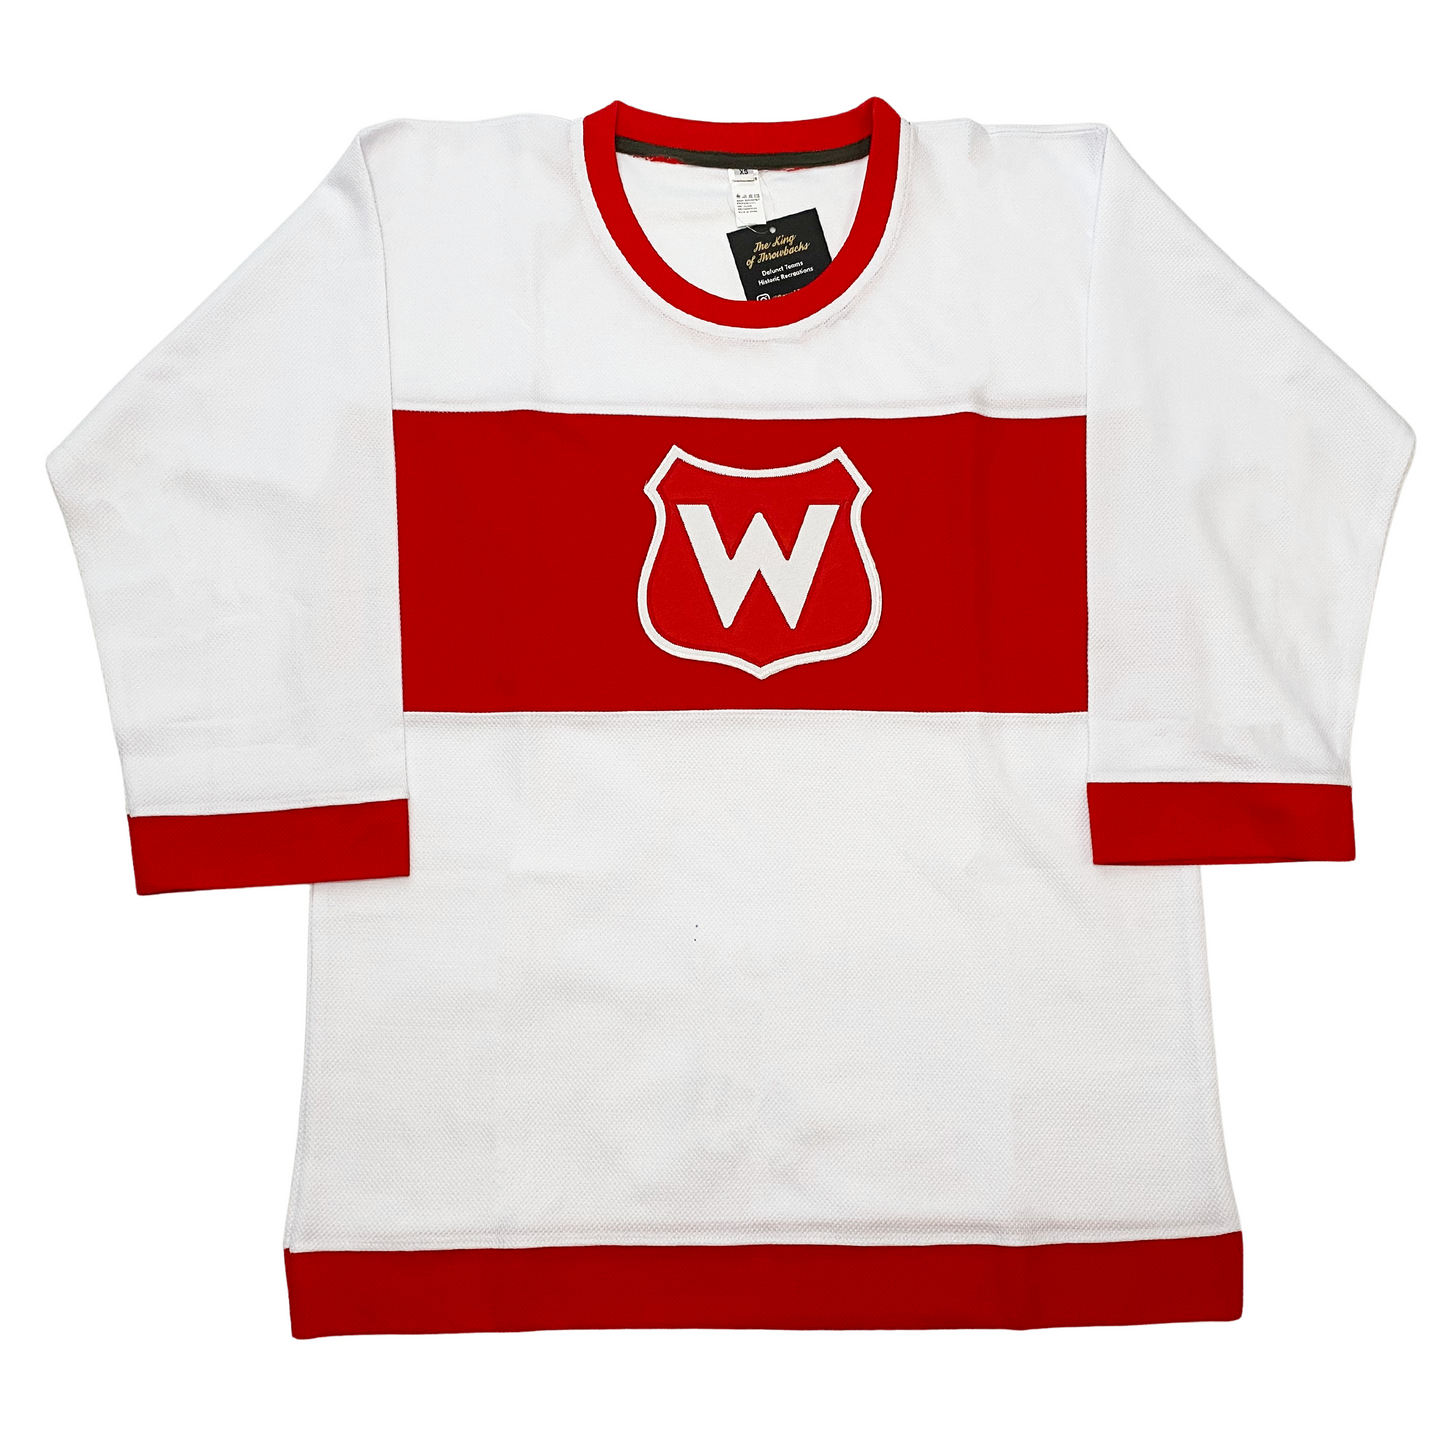 Montreal Wanderers Jersey